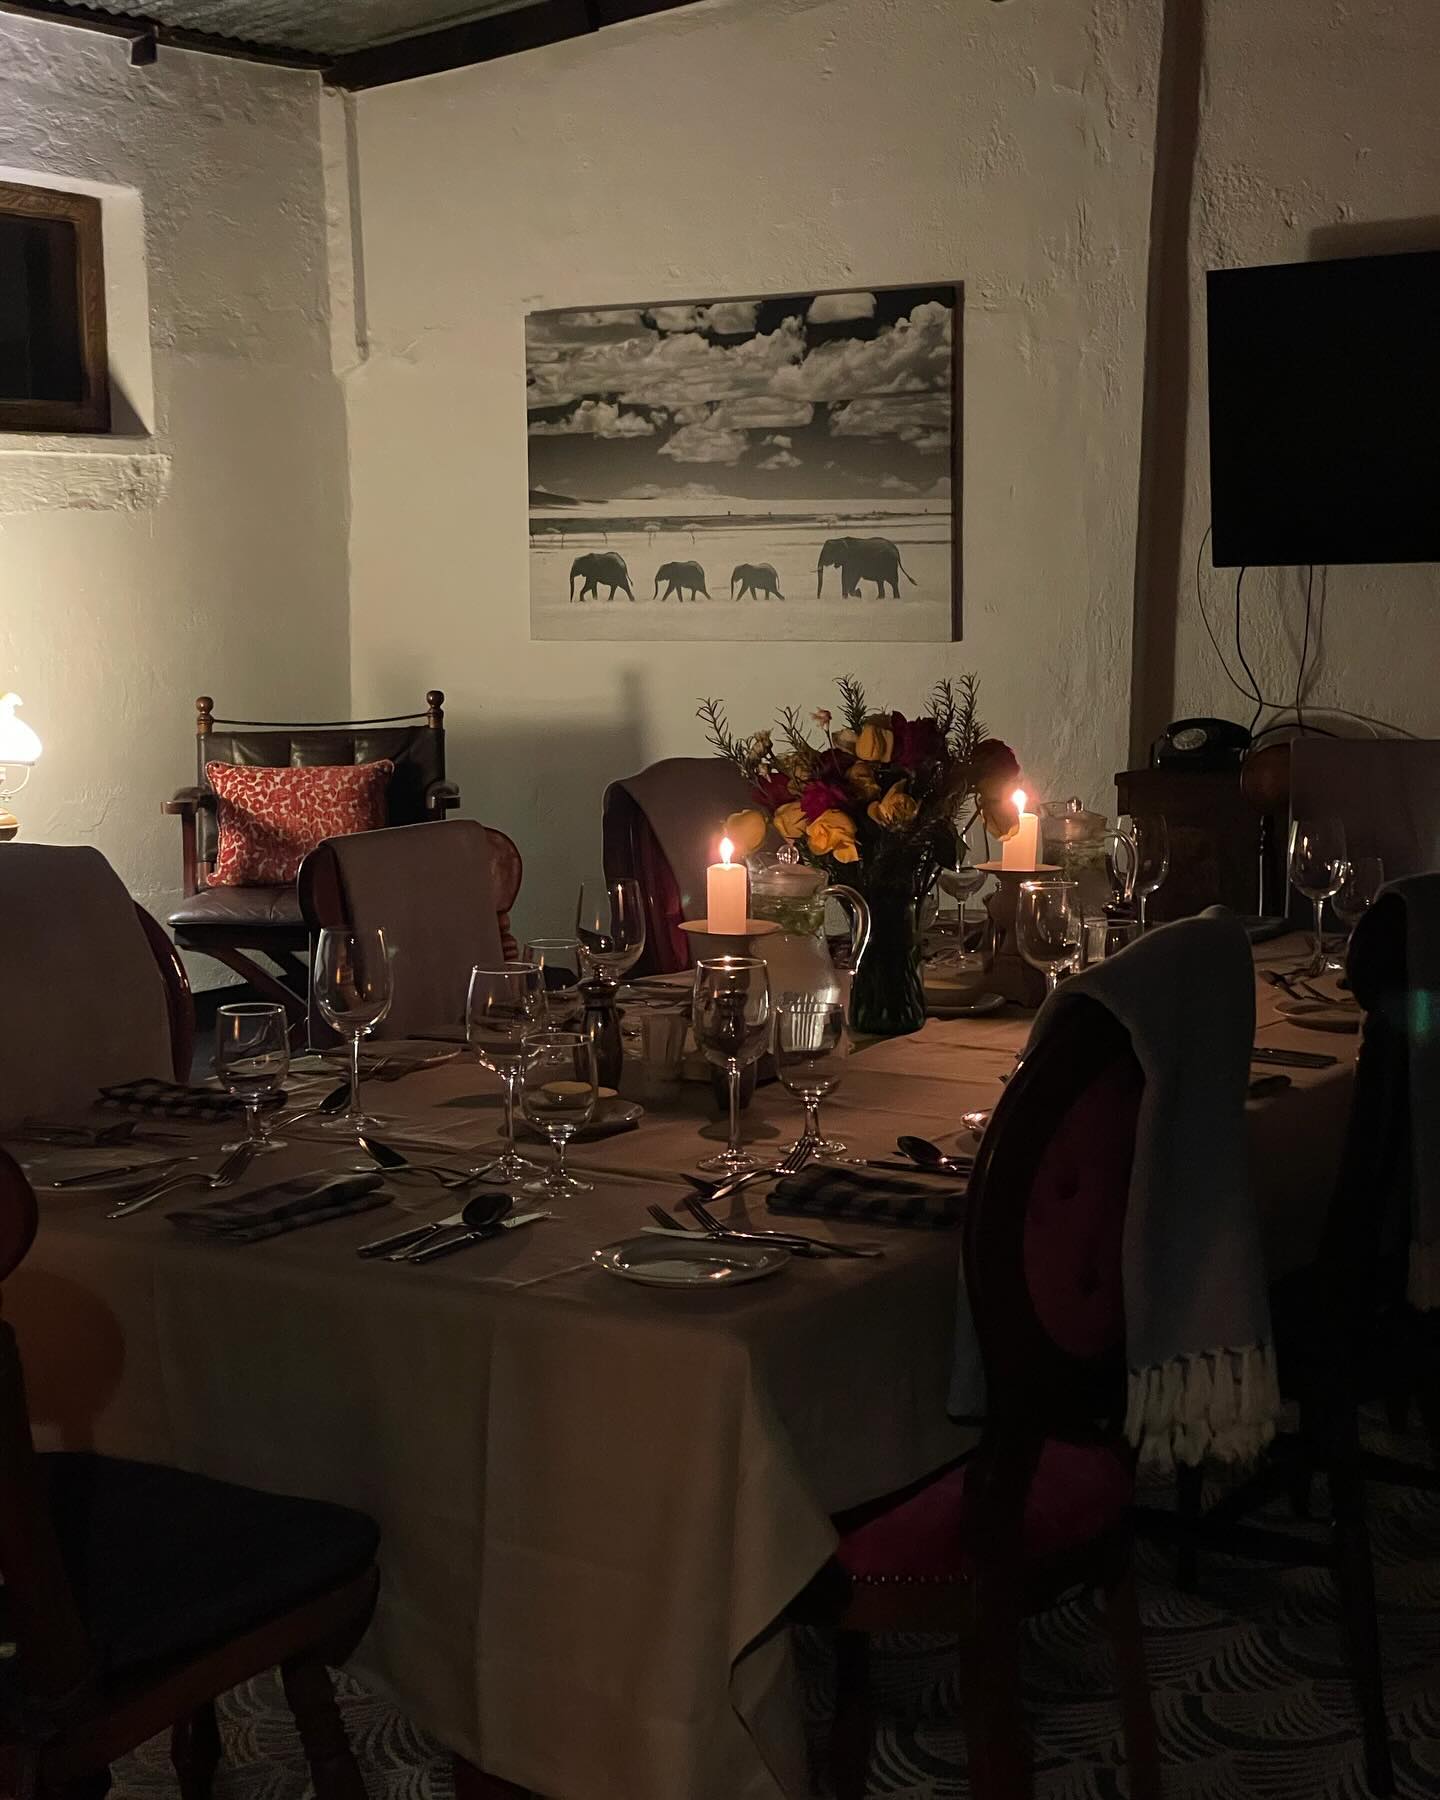 Private dining ….. our room of requirement is an elegant yet comfortable space to dine in private with your family or group of friends. With luxurious table linen from @sixteentables.za #dining #private #privatedining #luxury #linen #intimate #group #decor #design #interiordesign #interior